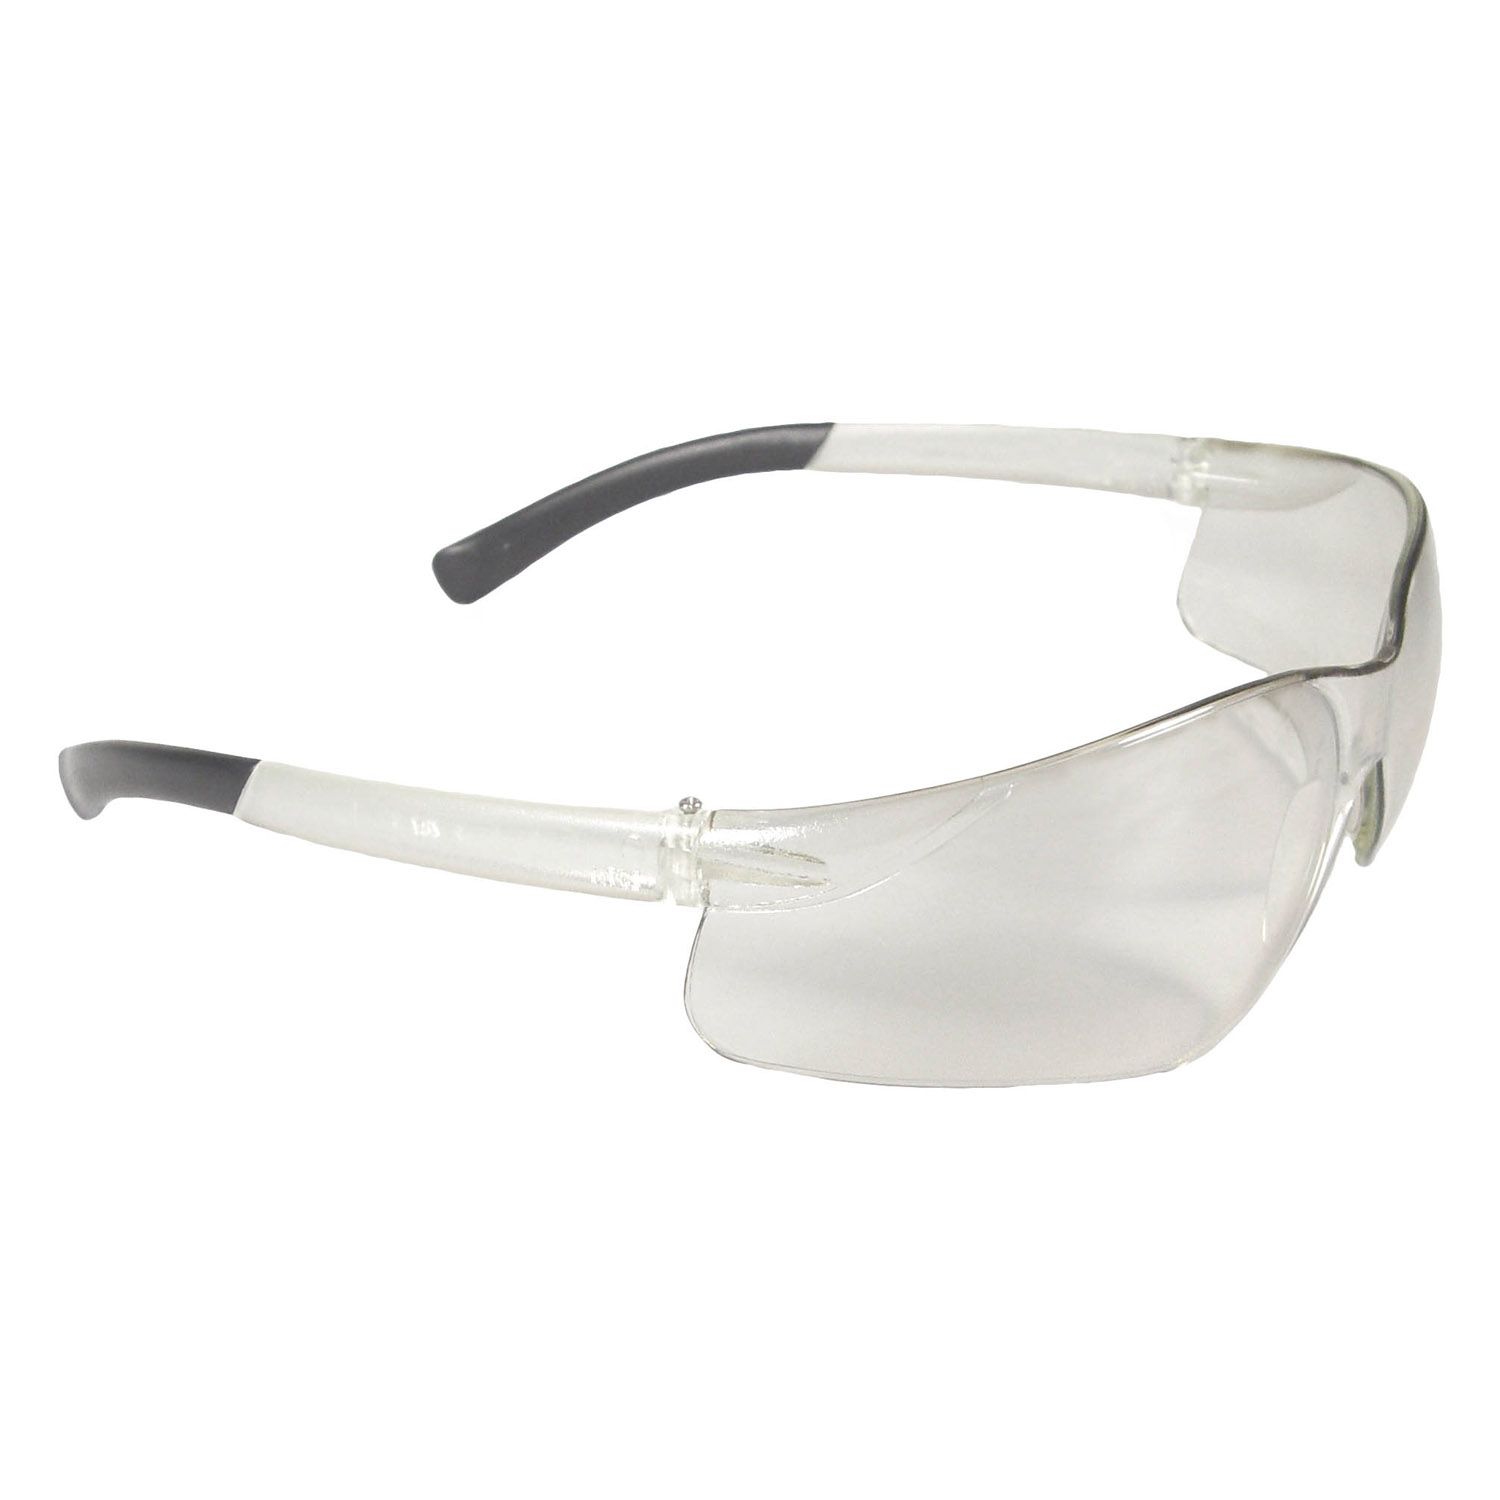 Radians Rad-Atac blue frameless safety glasses, wraparound, with clear polycarbonate anti-fog and scratch resistant lenses.